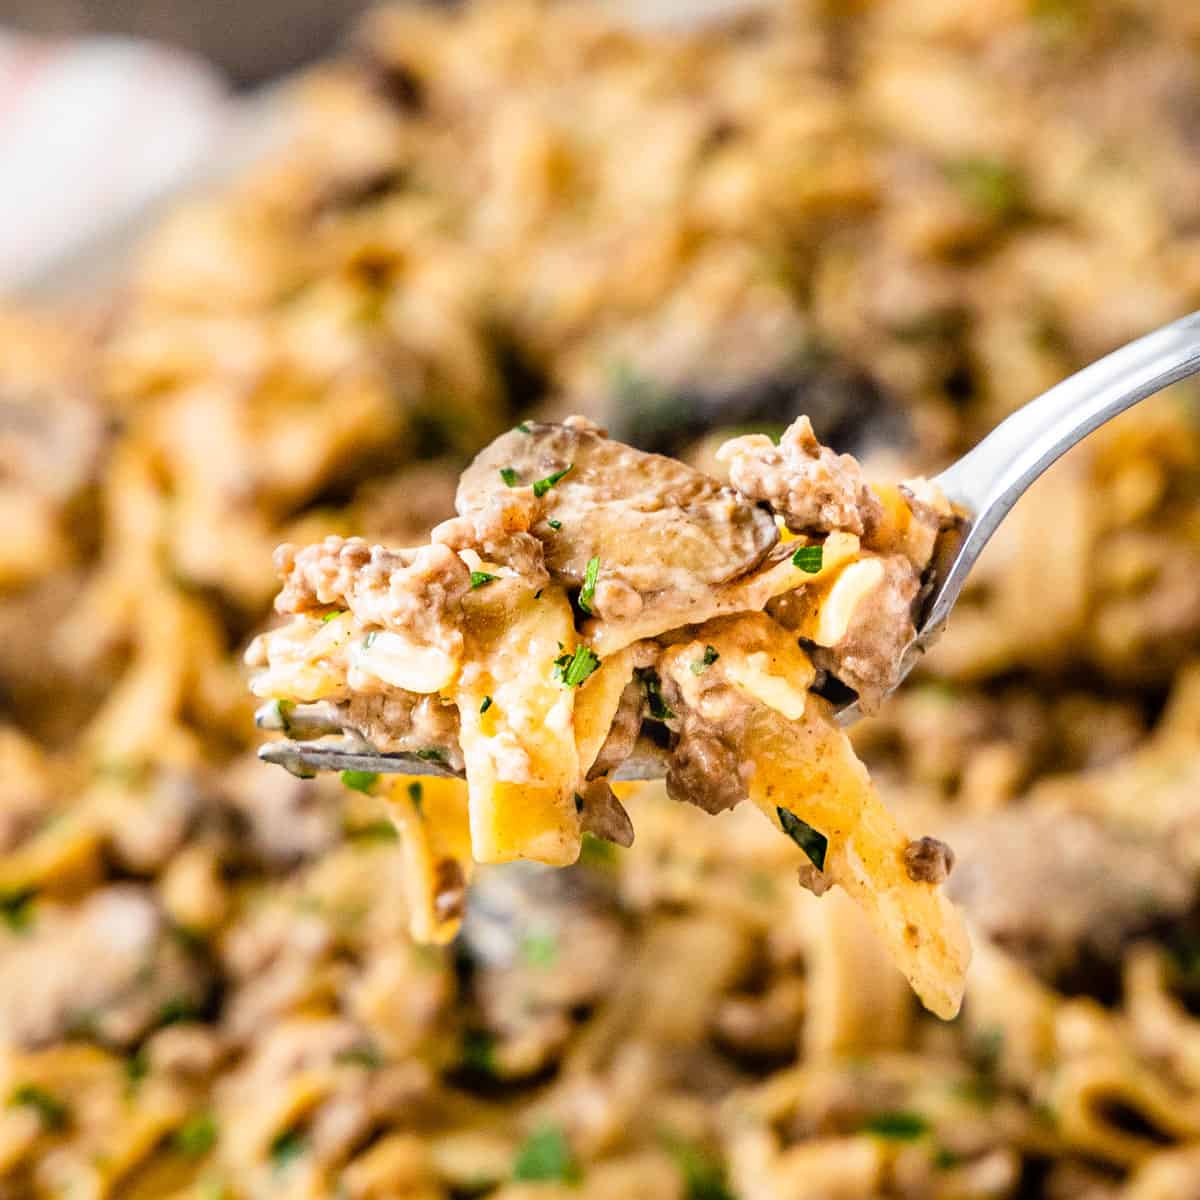 Close up of a fork with a bite of beef stroganoff held in front of a platter of the dish blurred in the background.